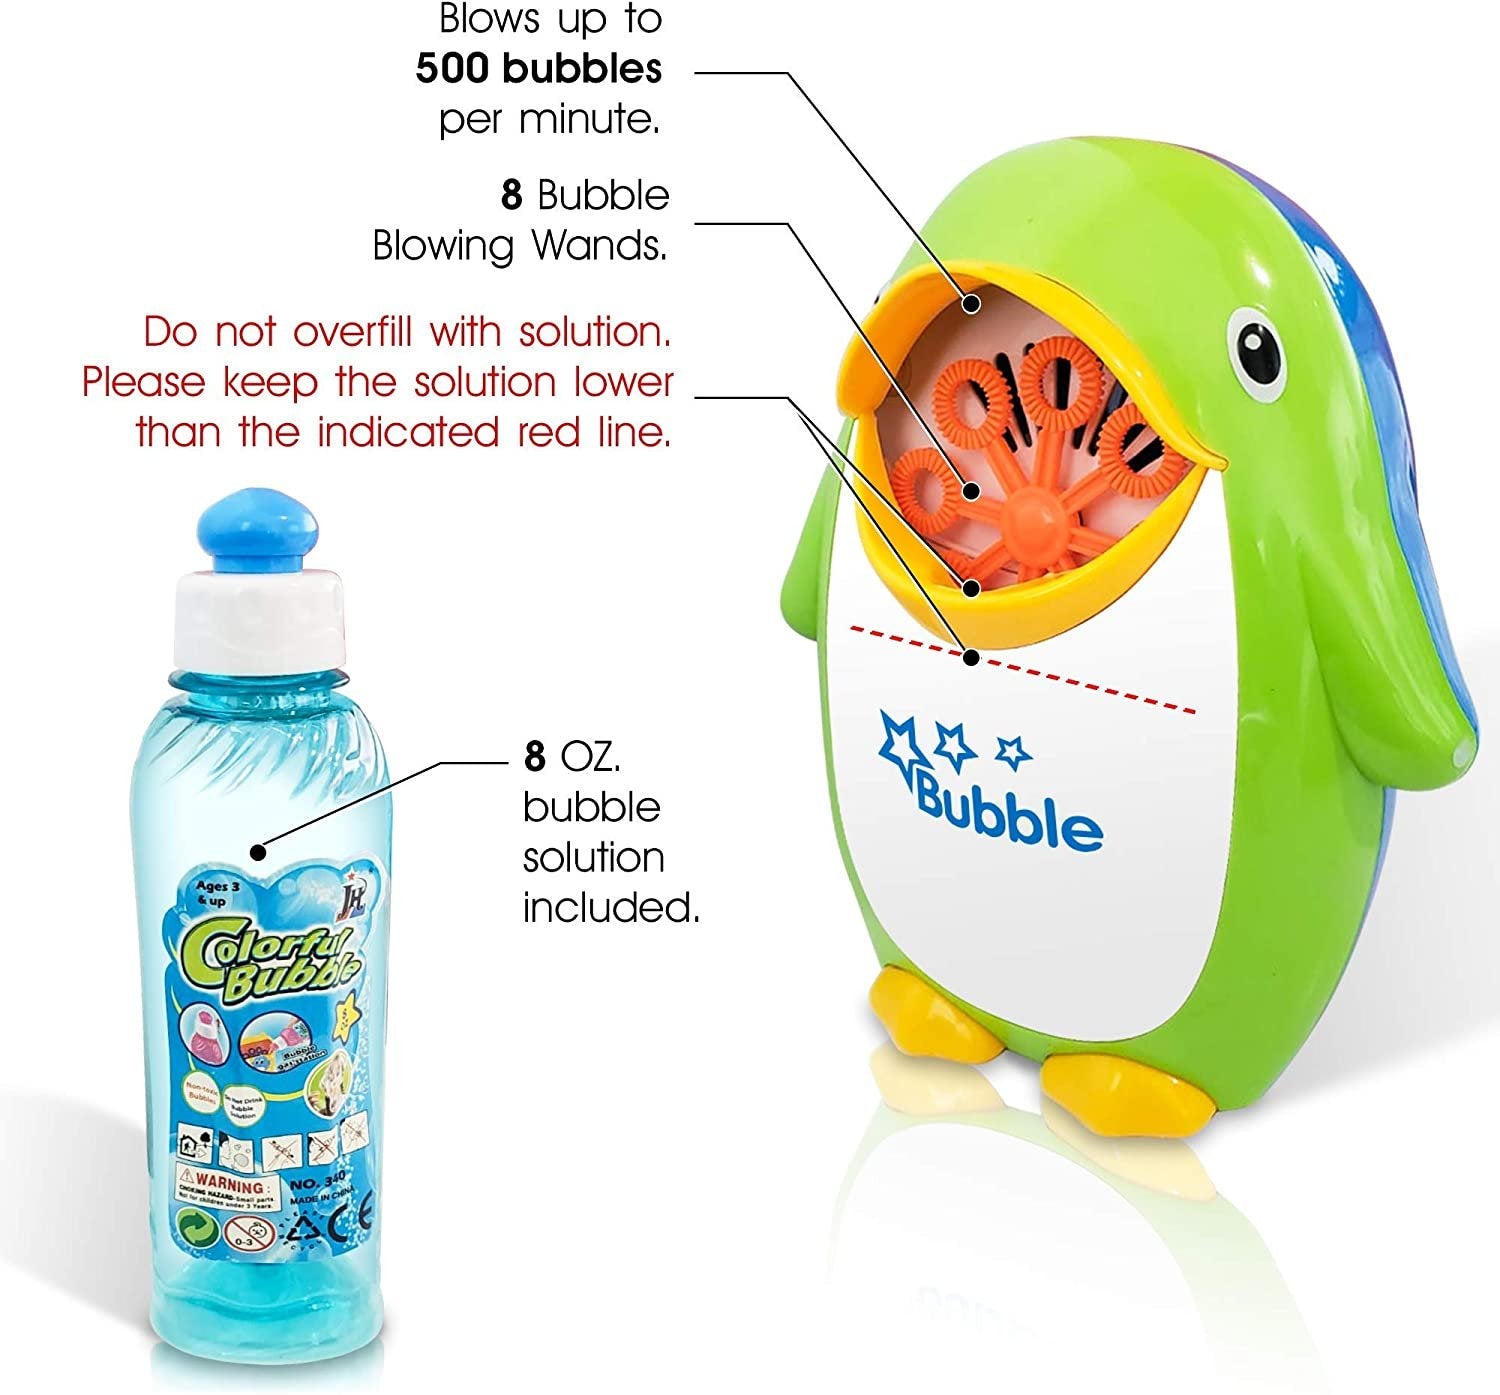 Penguin Bubble Machine with 8oz Bubble Solution, Cute Powerful Automatic Bubble Maker Toy for Kids and Parties, Simple and Easy to Use, Best for Wedding, Birthday Party, DJ, Baby Shower